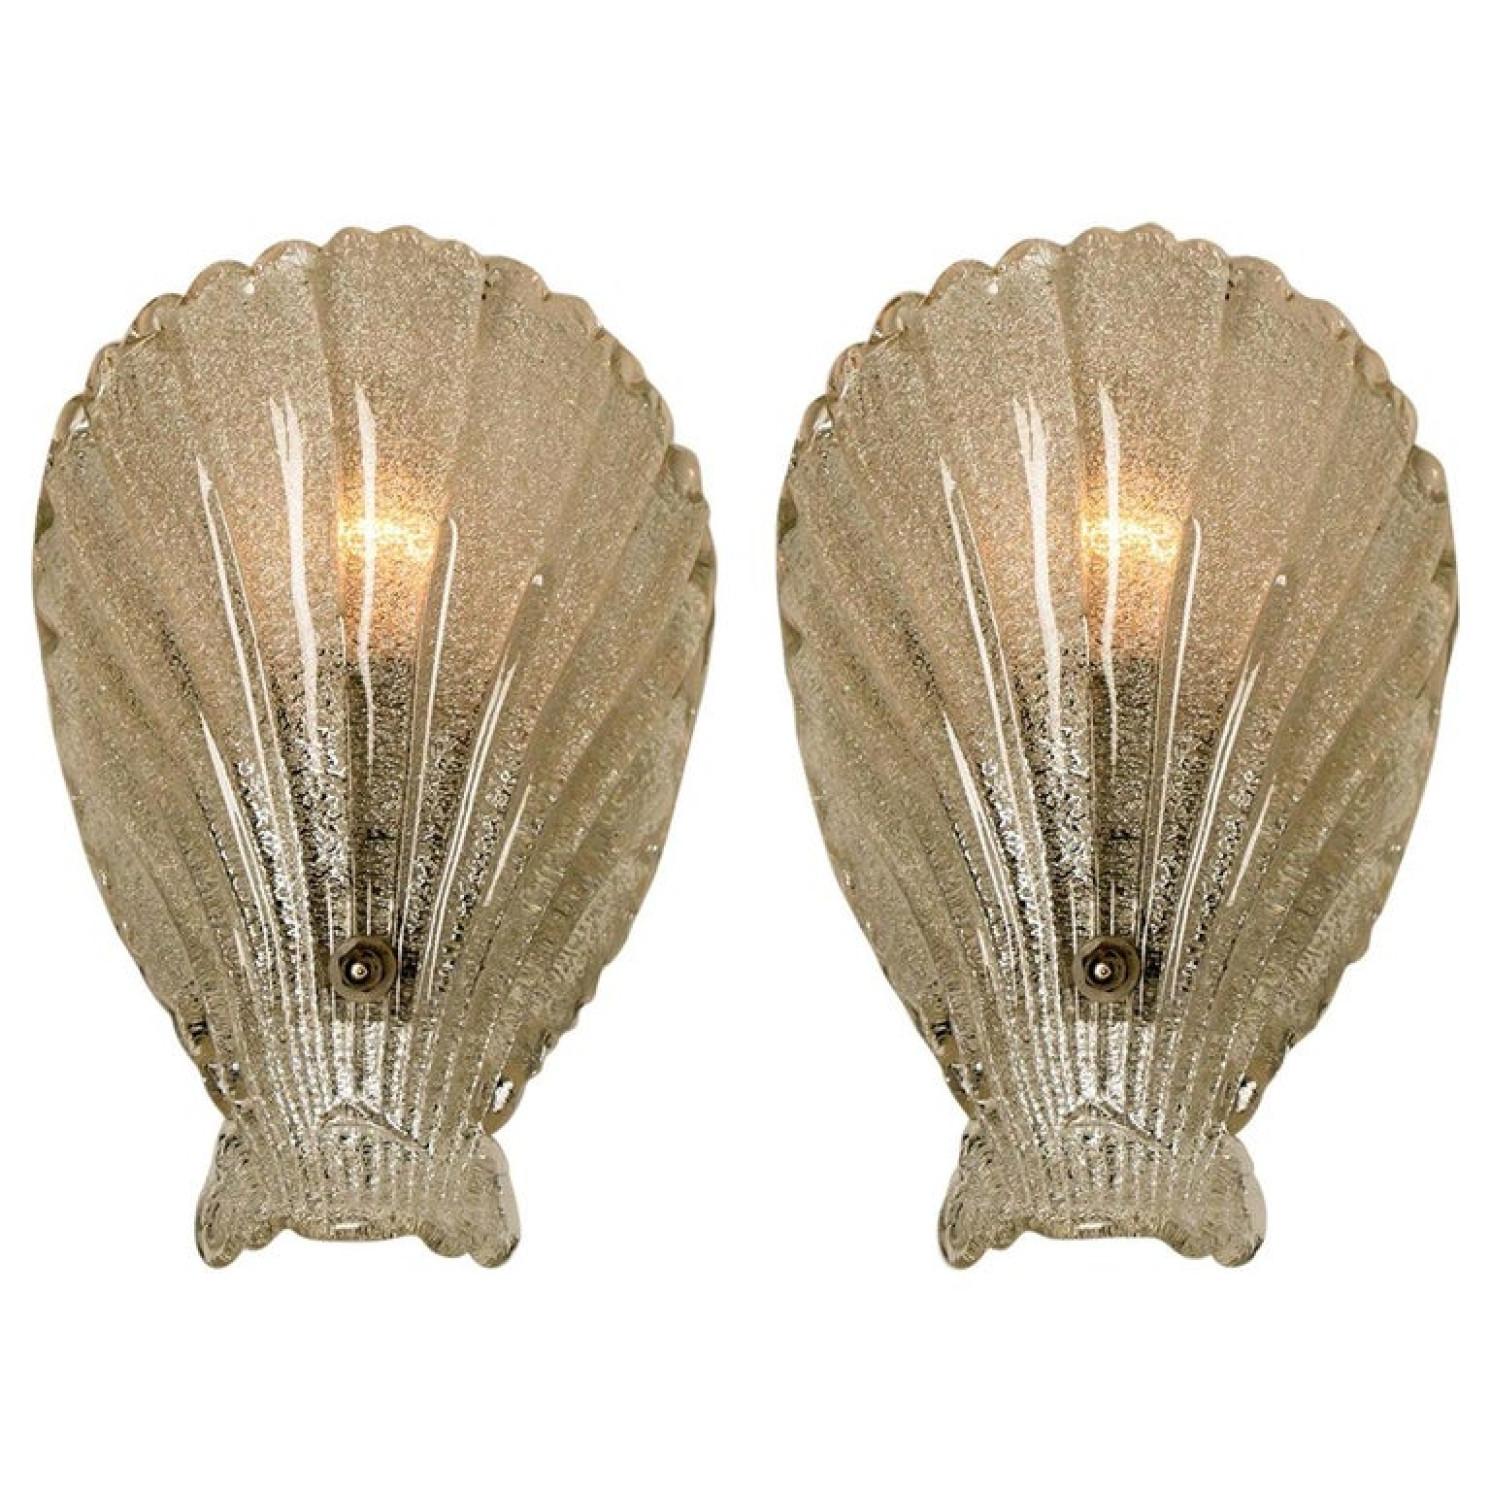 Pair of sea shell form wall lights, produced in Italy, in textured glass, affixed against a chrome base, circa 1960s.
An iconic design from the 1960s and still relevant today.

Good condition, consistent with age and use. Each light requires one E14